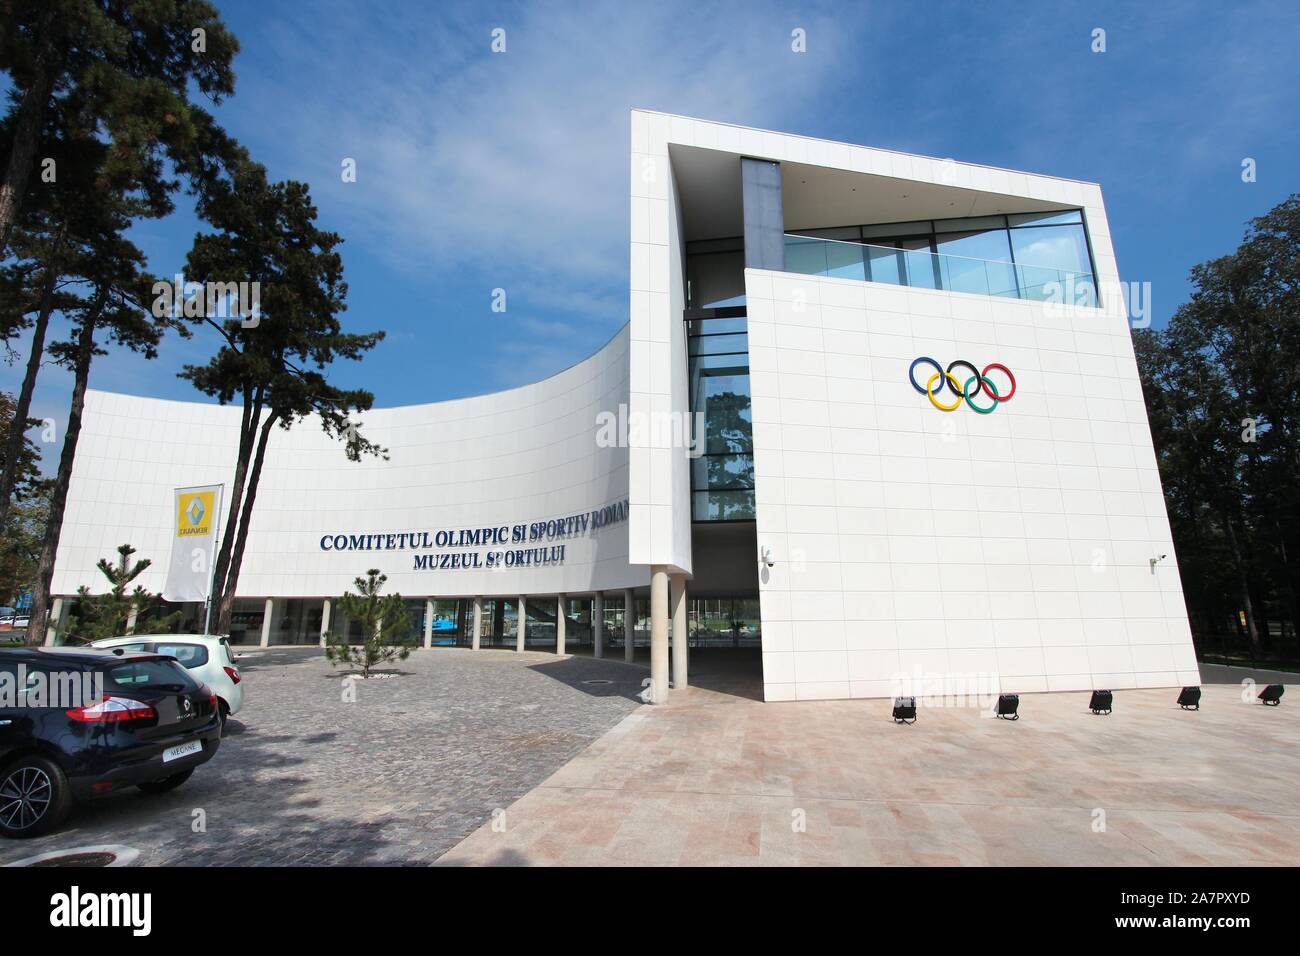 BUCHAREST, ROMANIA - AUGUST 19: Romanian Olympic Committee building on August 19, 2012 in Bucharest, Romania. The beautiful contemporary building was Stock Photo